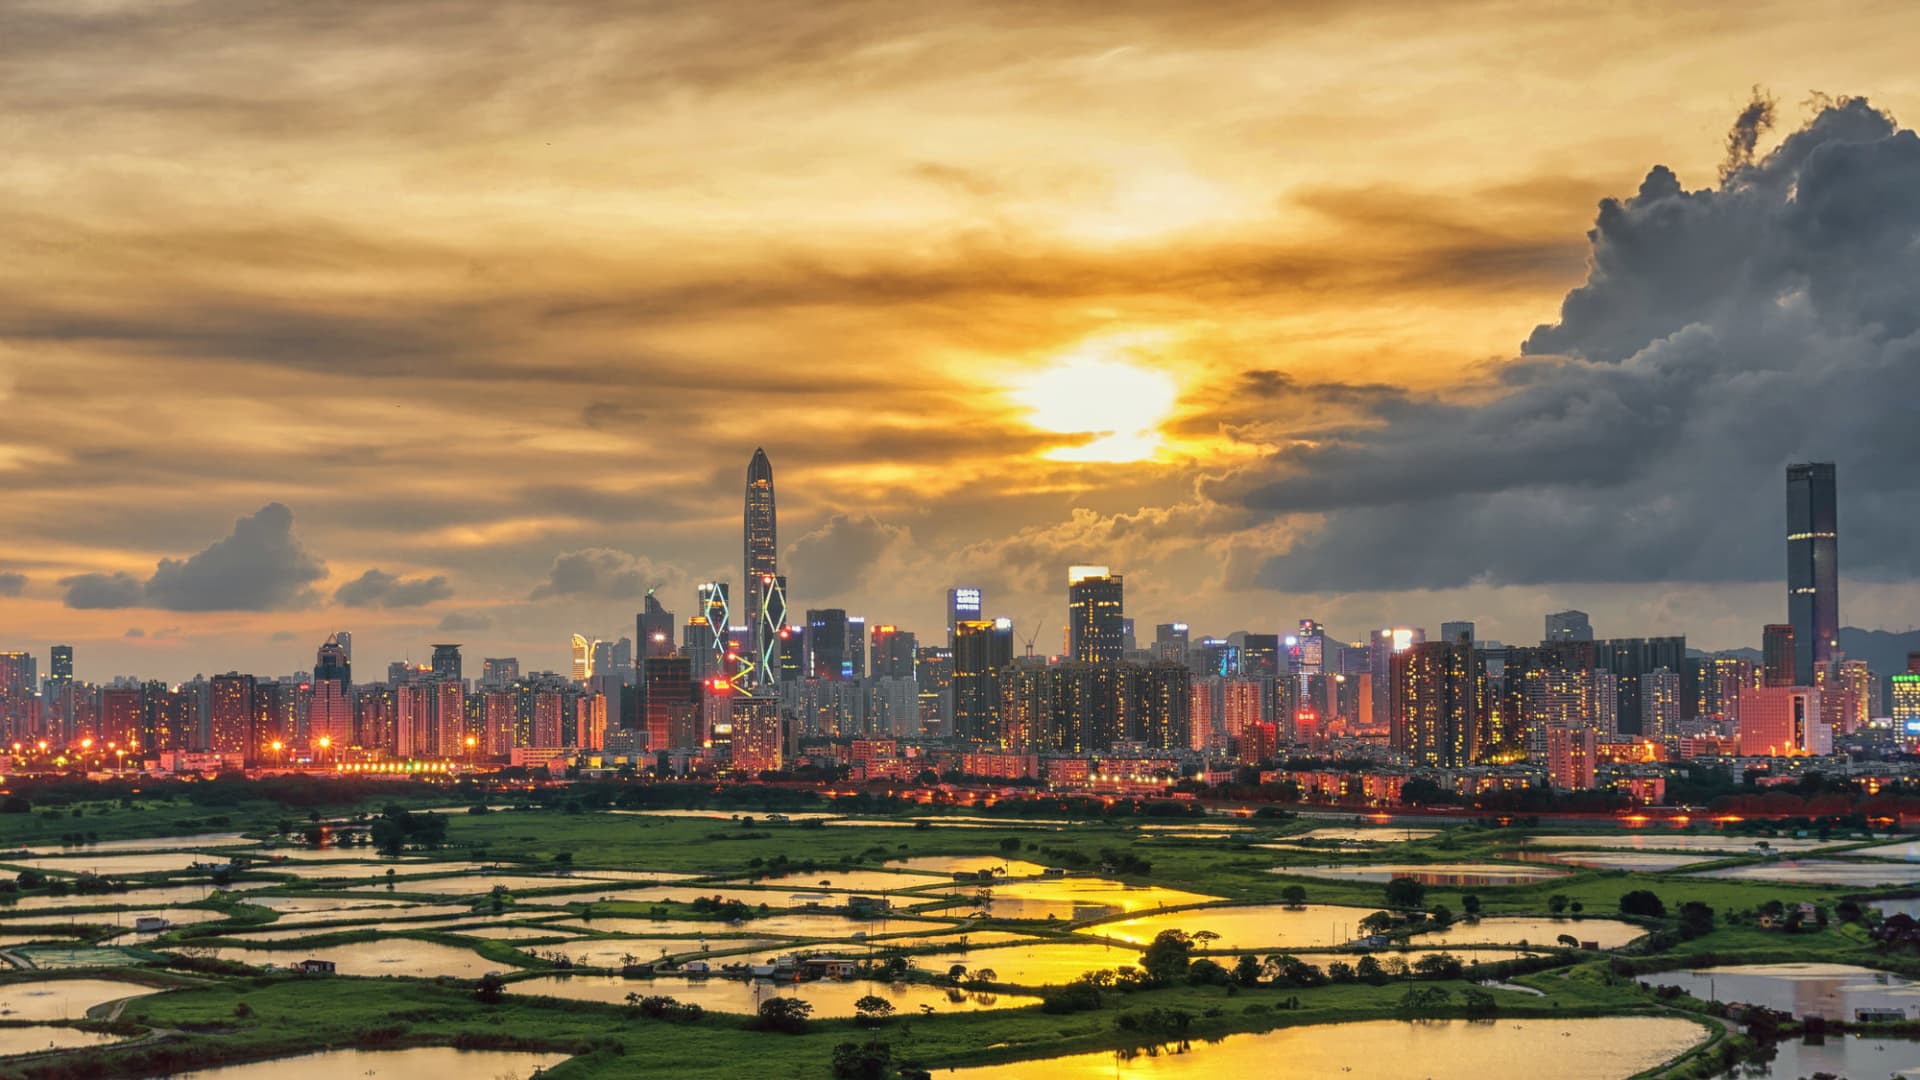 Chinas Shenzhen metropolis sees fastest growth in millionaires globally [Video]